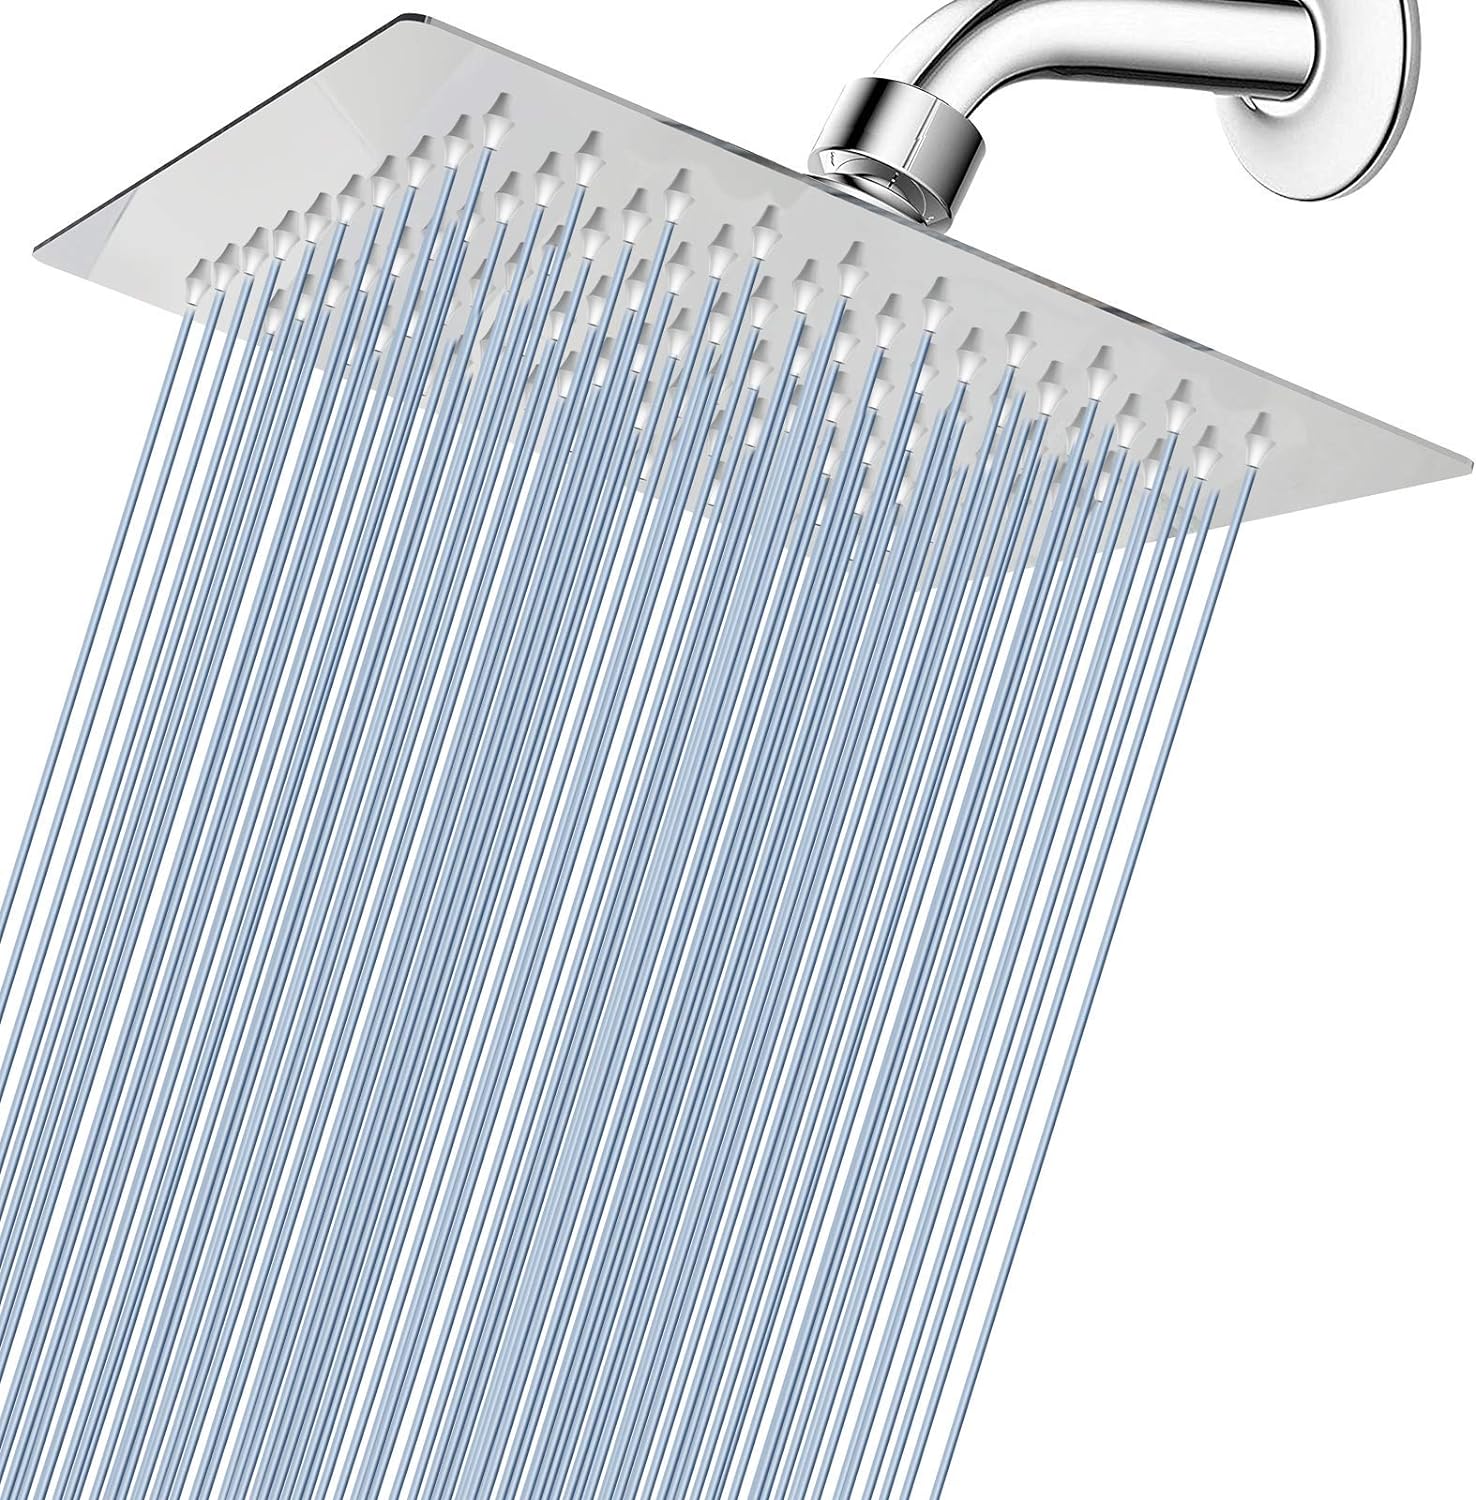 Voolan Rain Shower head, High Pressure Shower Head Made of 304 Stainless Steel, Relaxed Shower Experience Even at Low Water Flow and Pressure (8 Chrome)